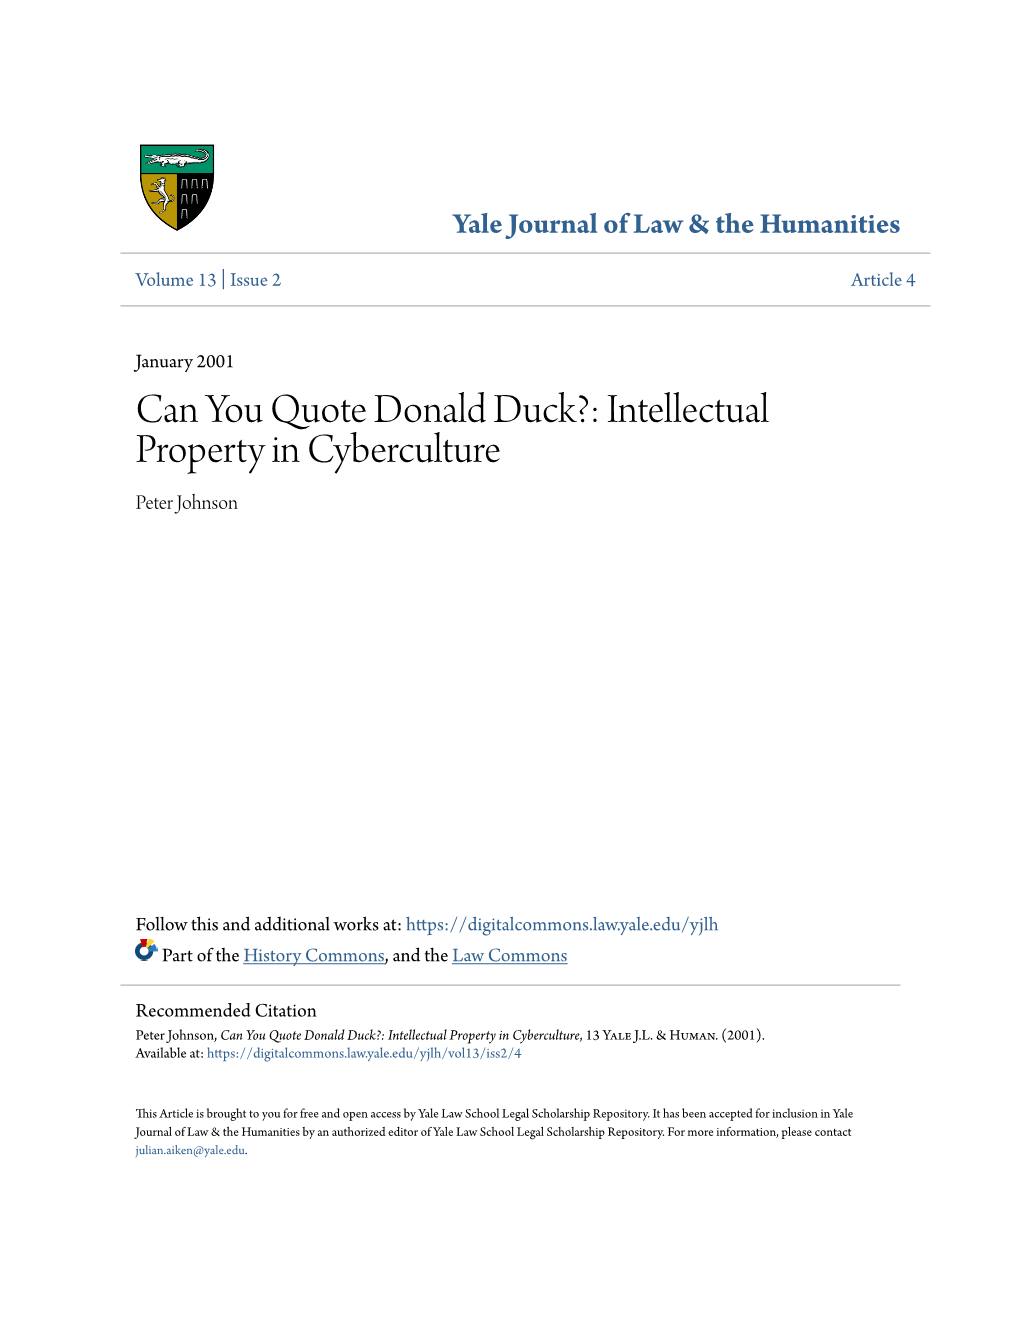 Can You Quote Donald Duck?: Intellectual Property in Cyberculture Peter Johnson